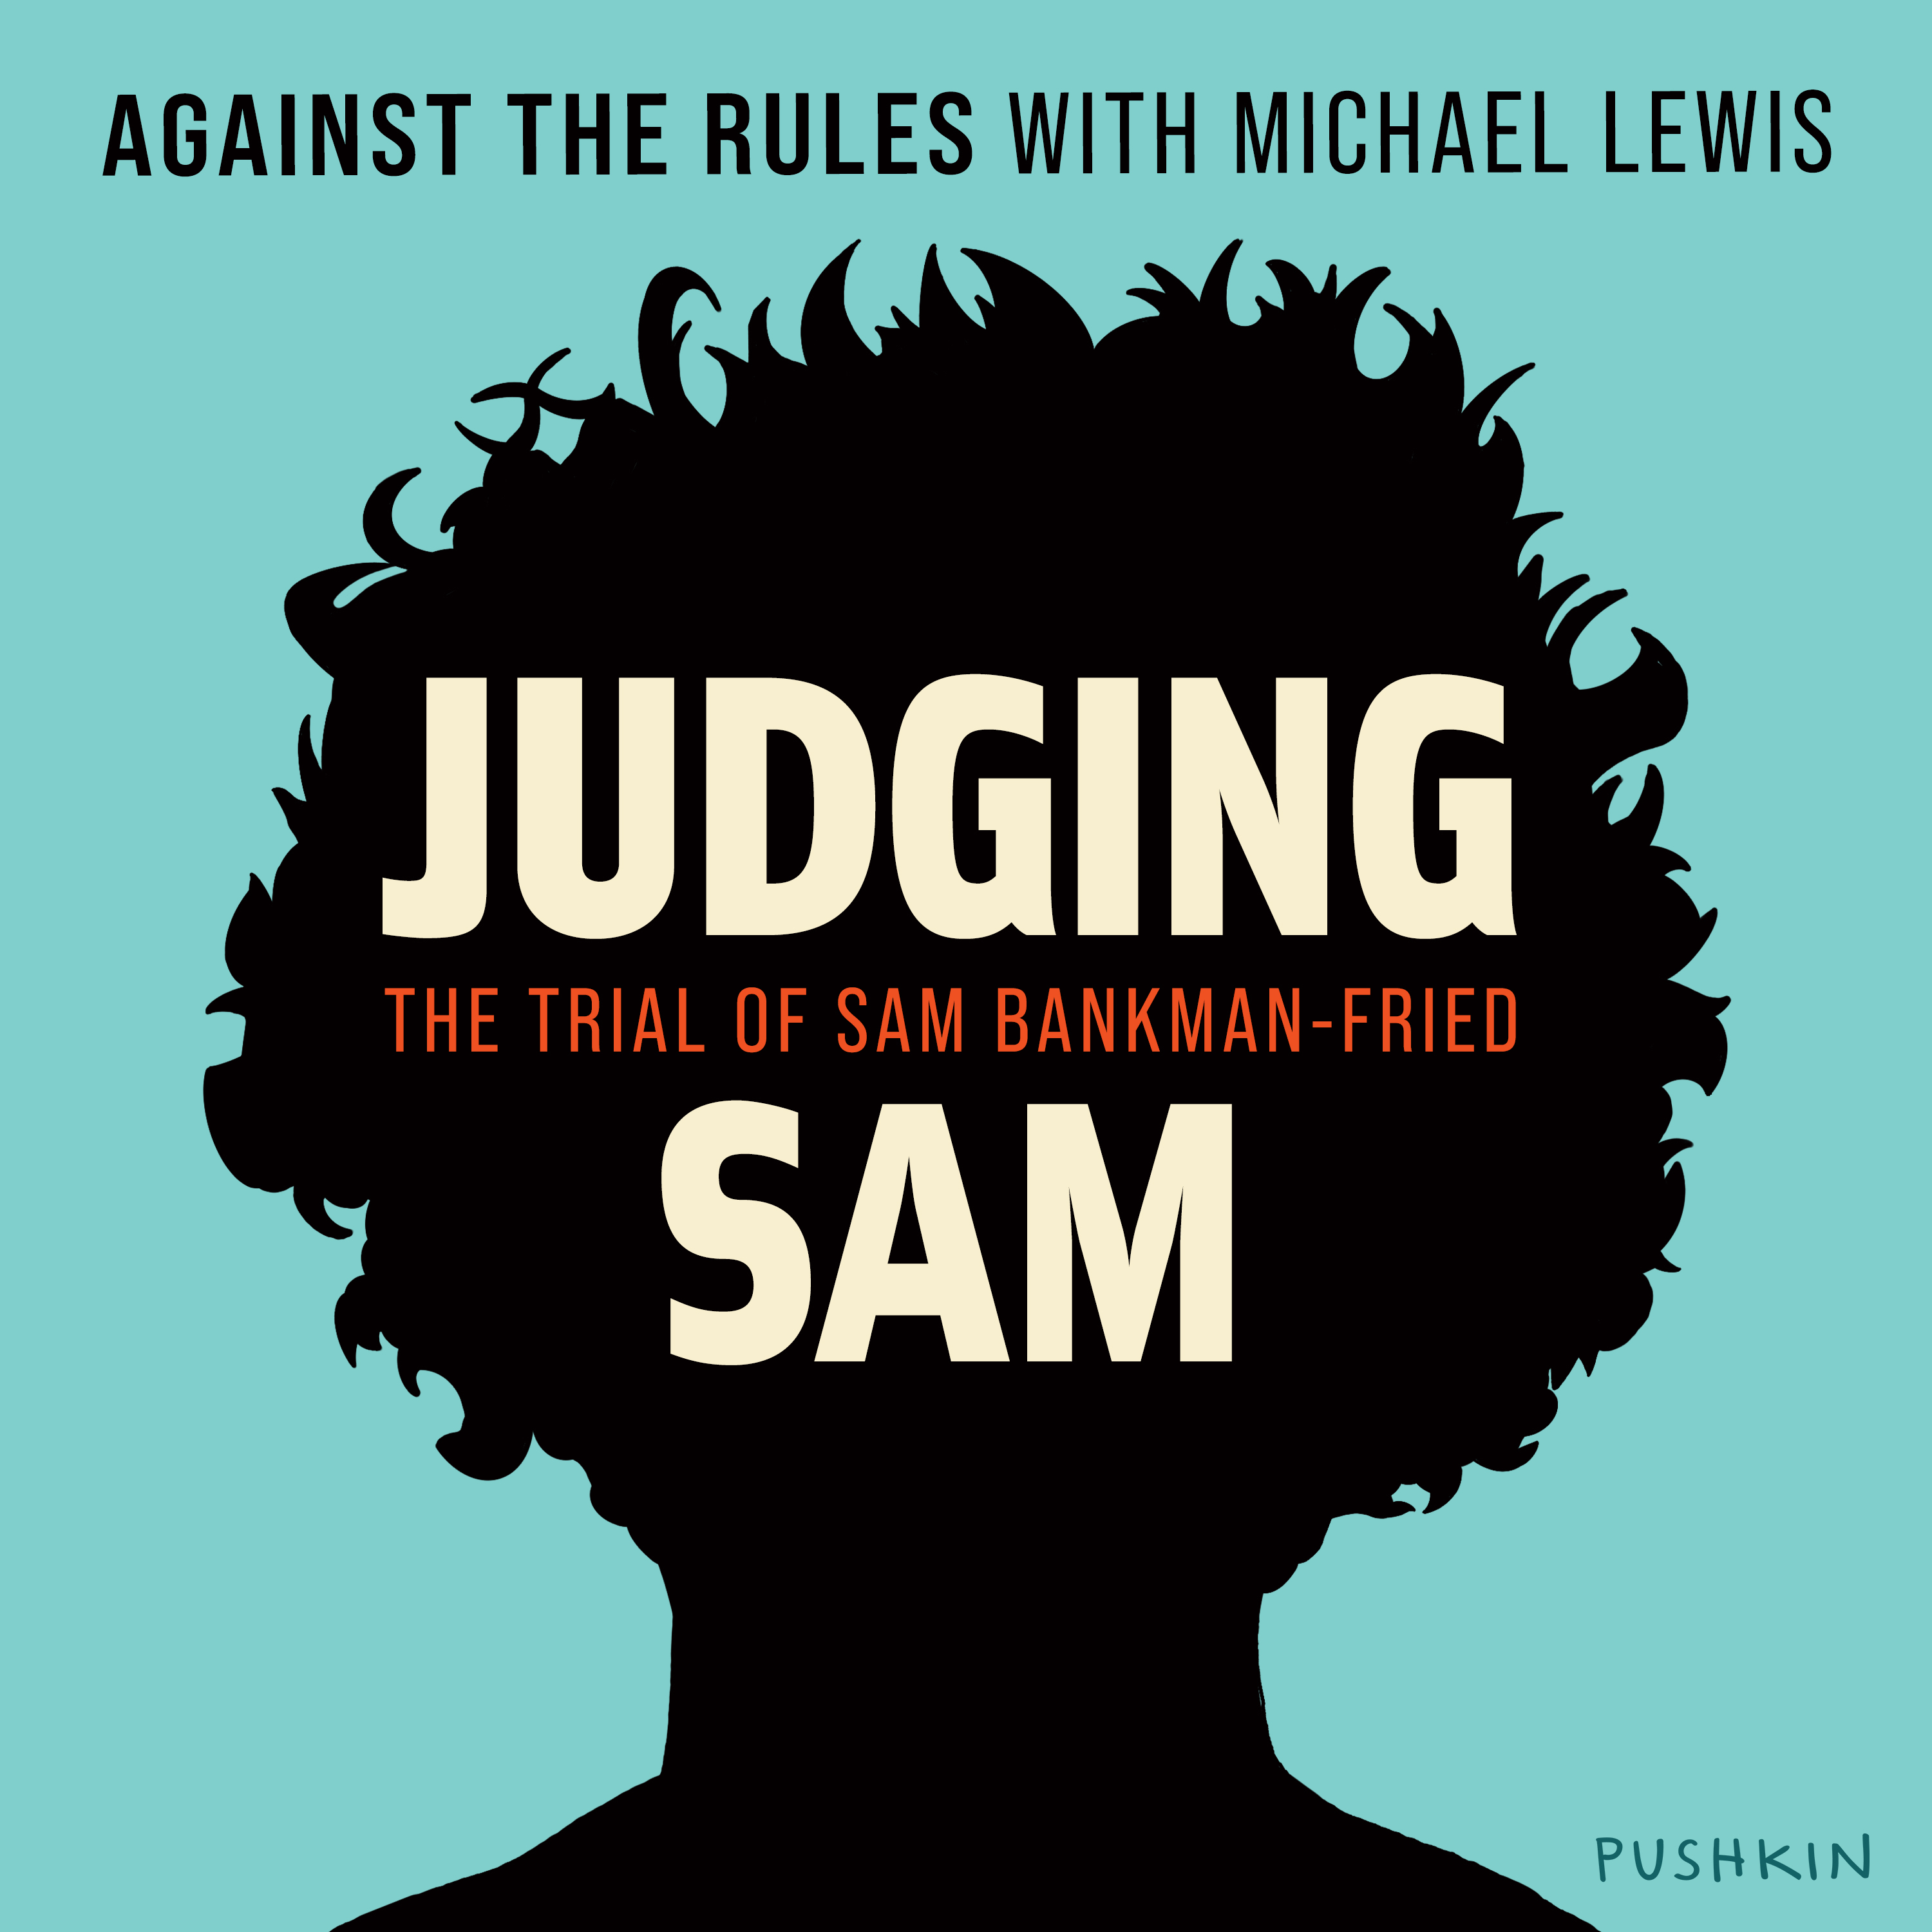 Against the Rules with Michael Lewis: The Trial of Sam Bankman-Fried podcast show image